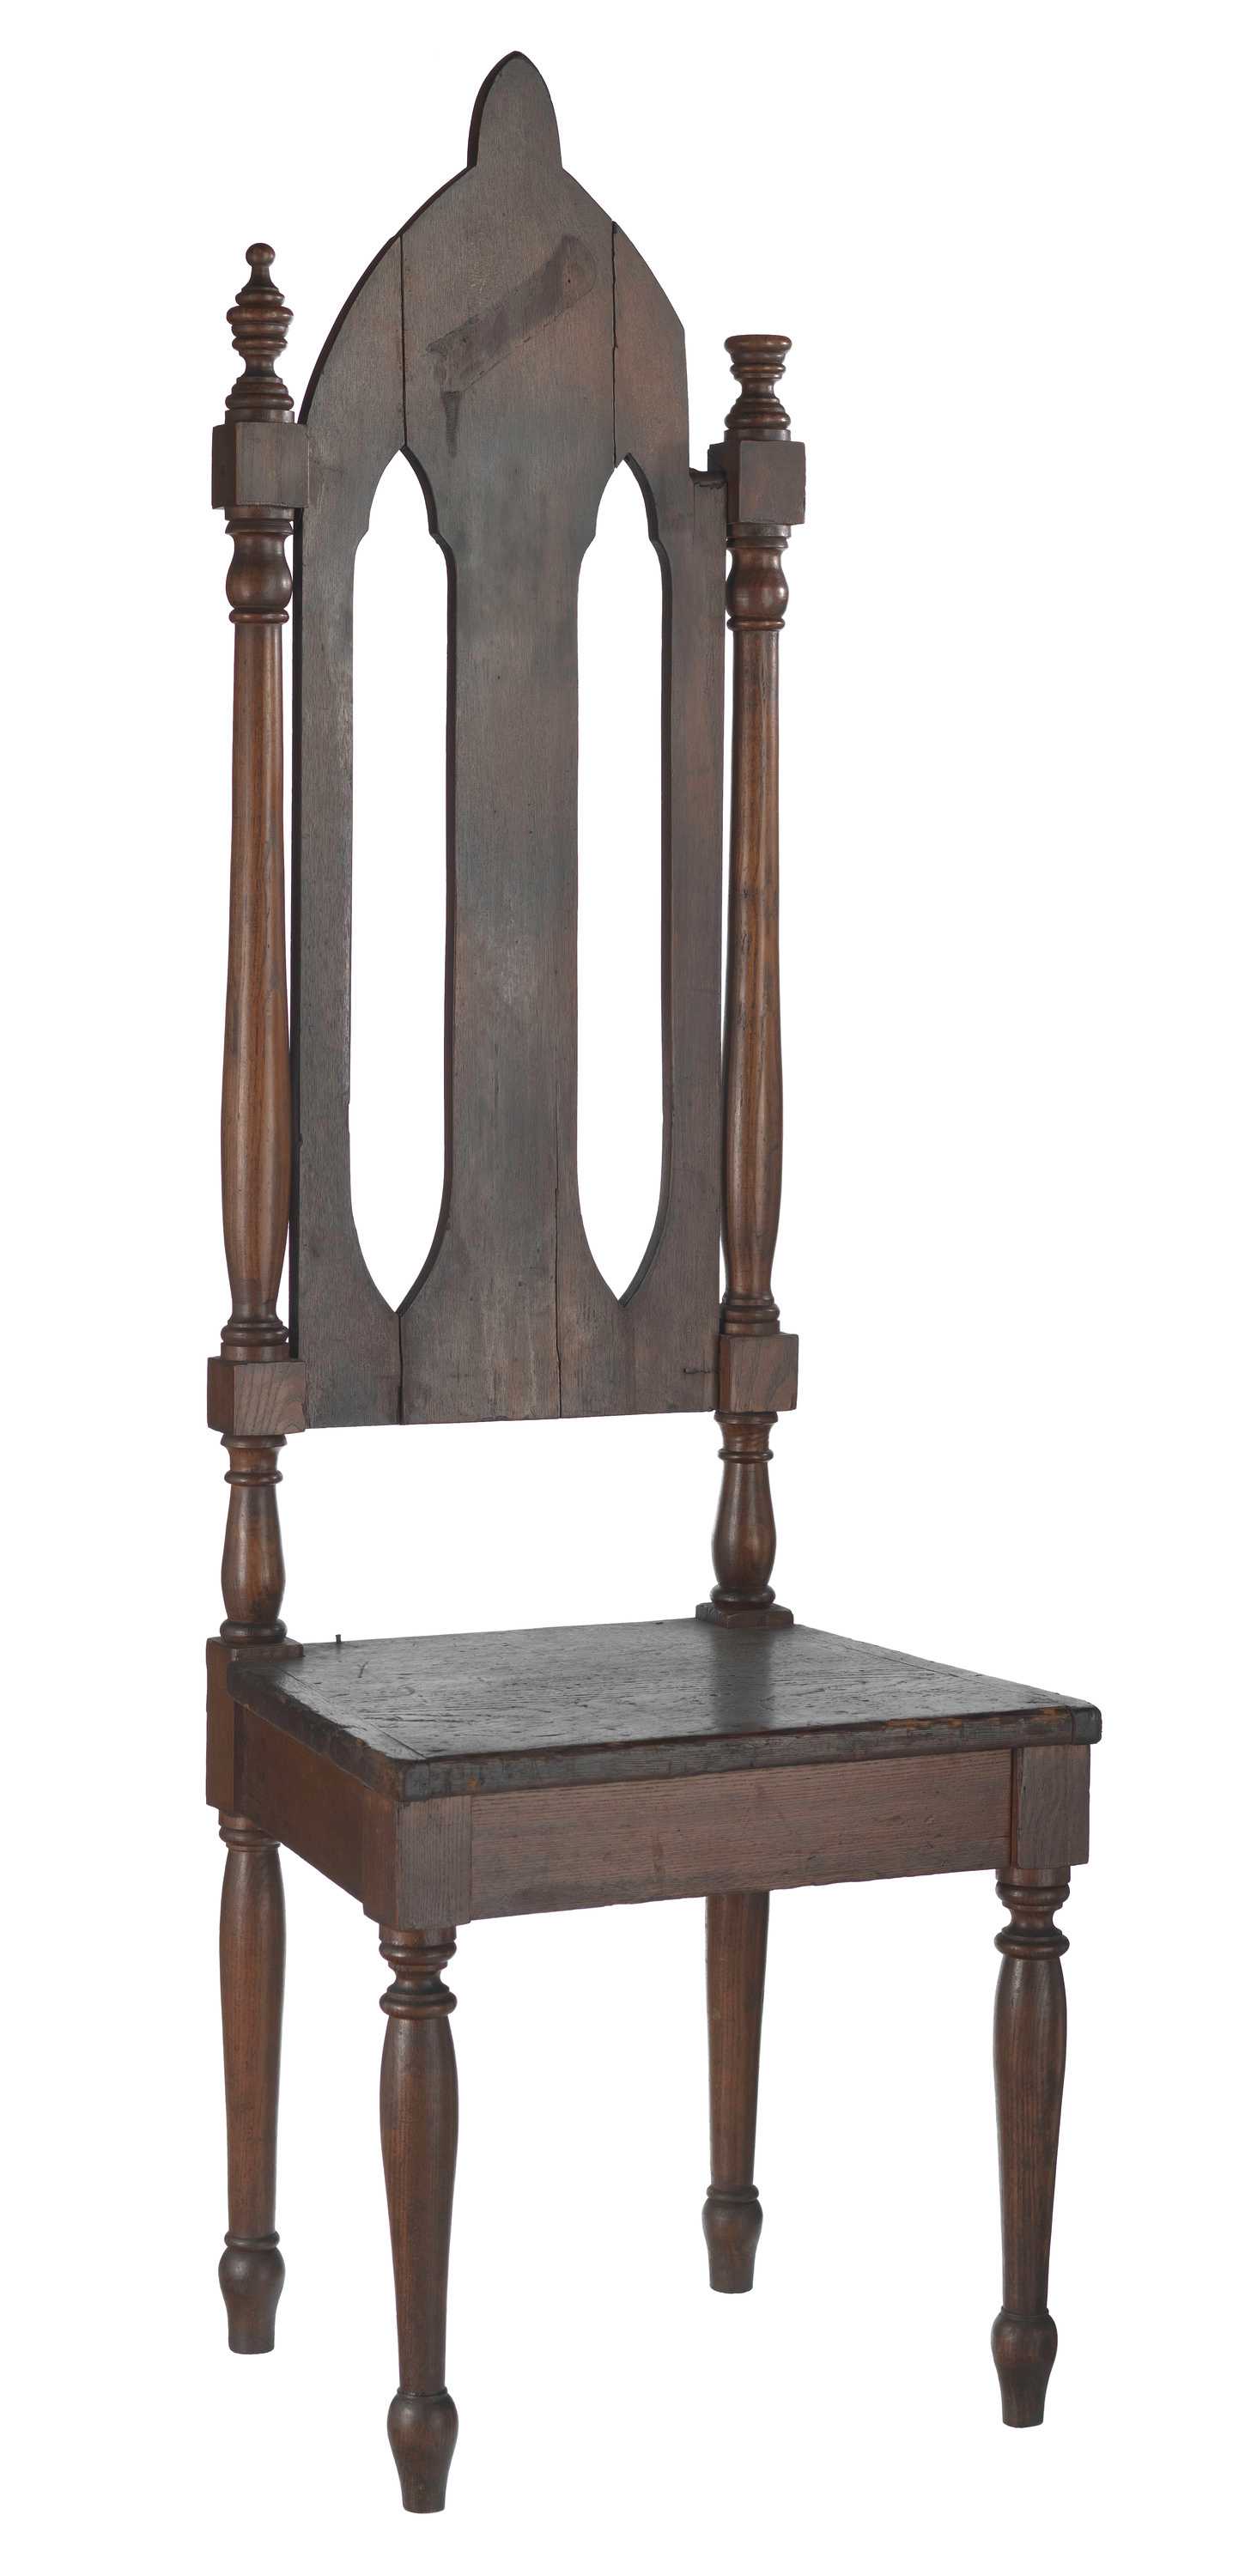 A high backed wooden chair used at the Prince Hall Masonic Lodge of Massachusetts.